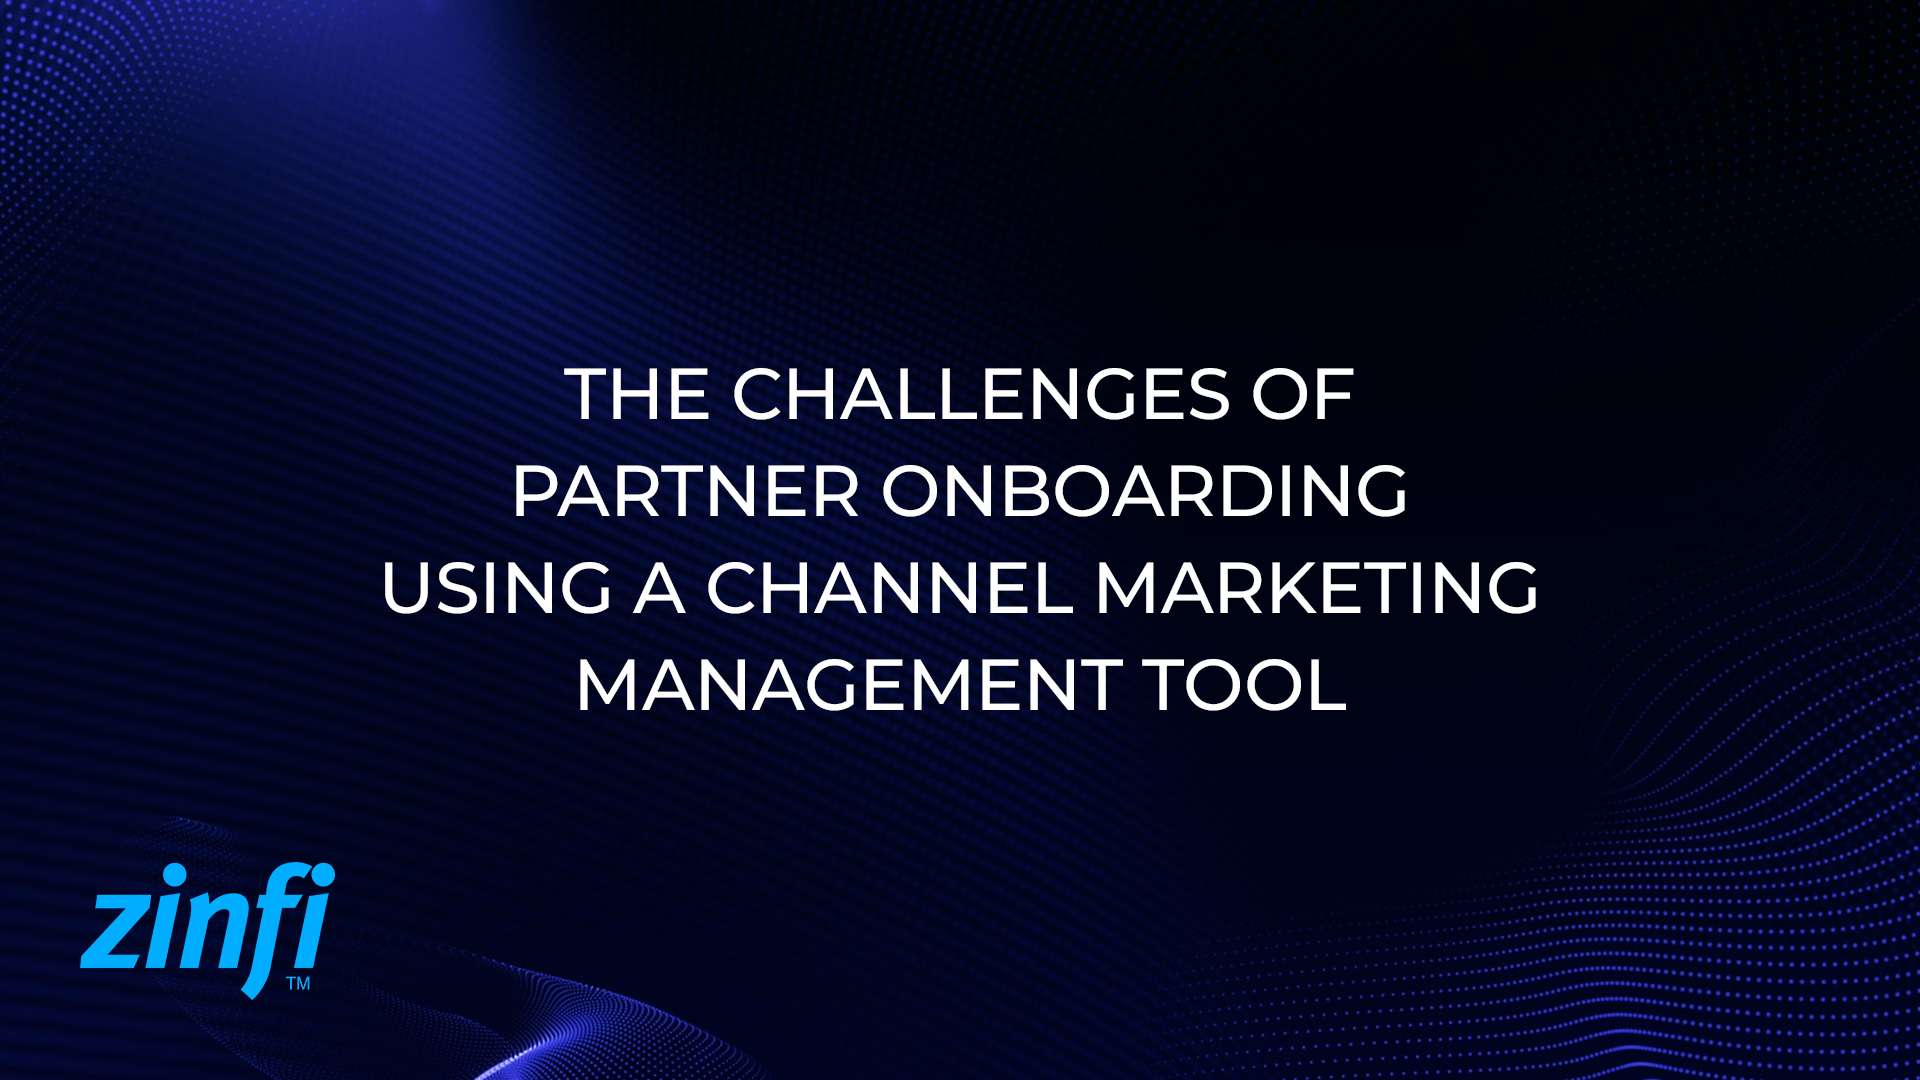 The Challenges of Partner Onboarding Using a Channel Marketing Management Tool